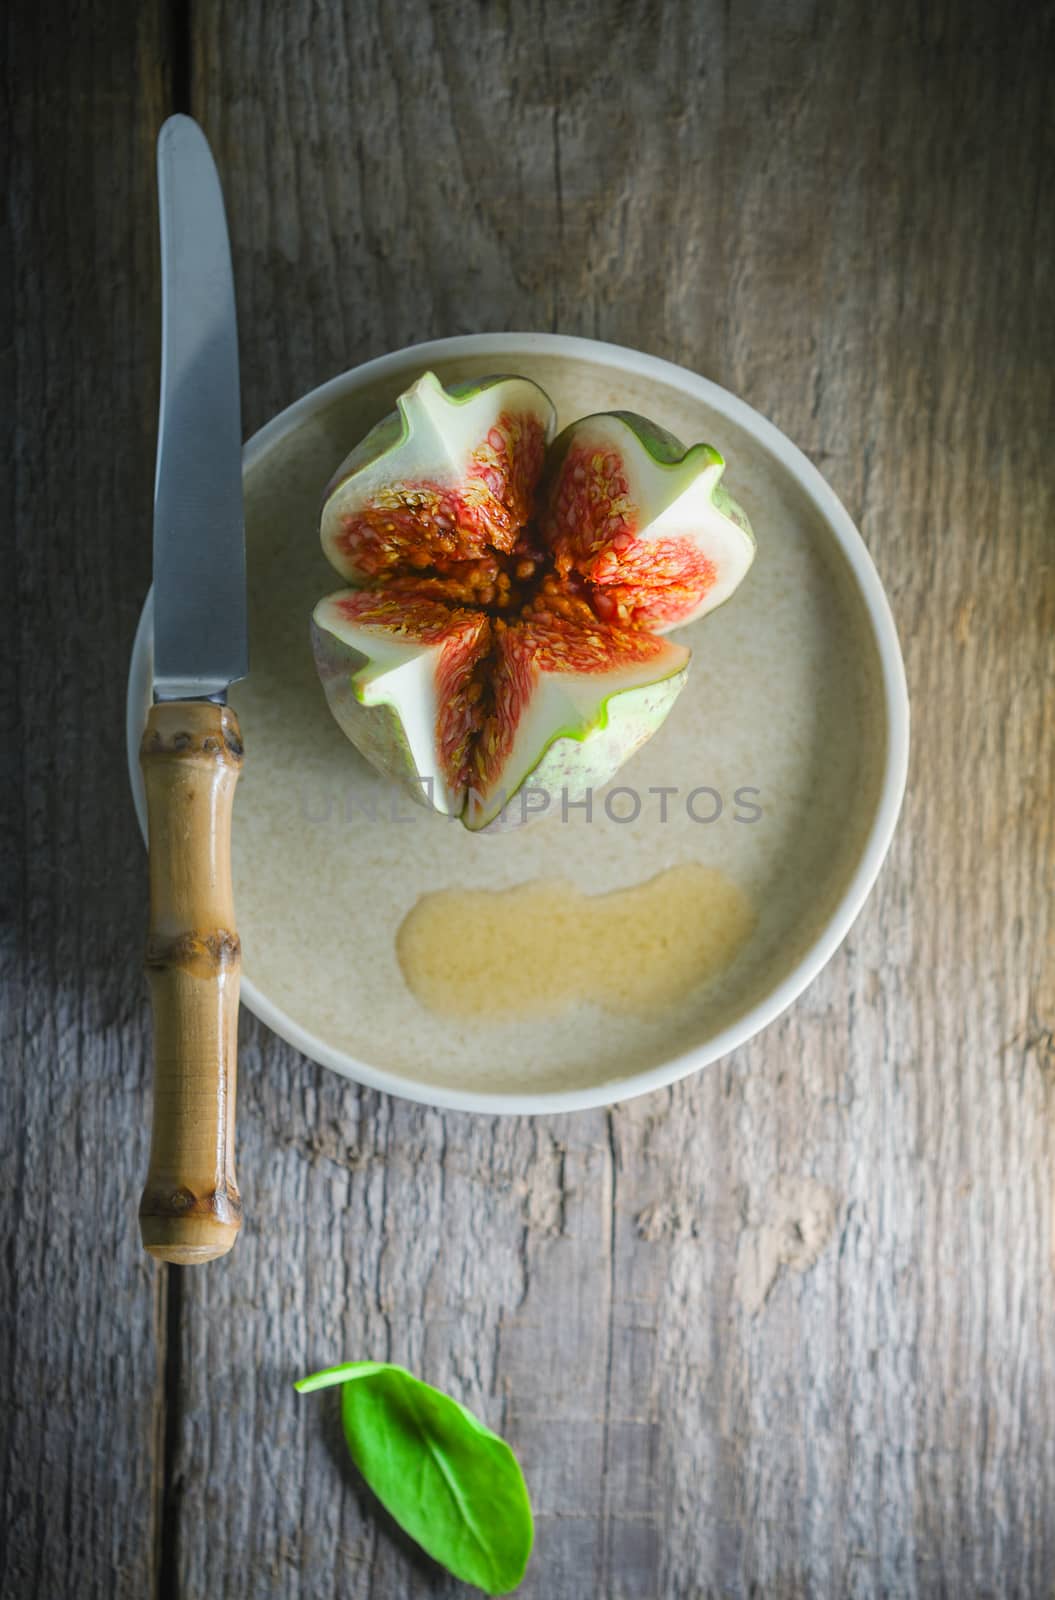 Fresh Juicy fig with a knife on the plate